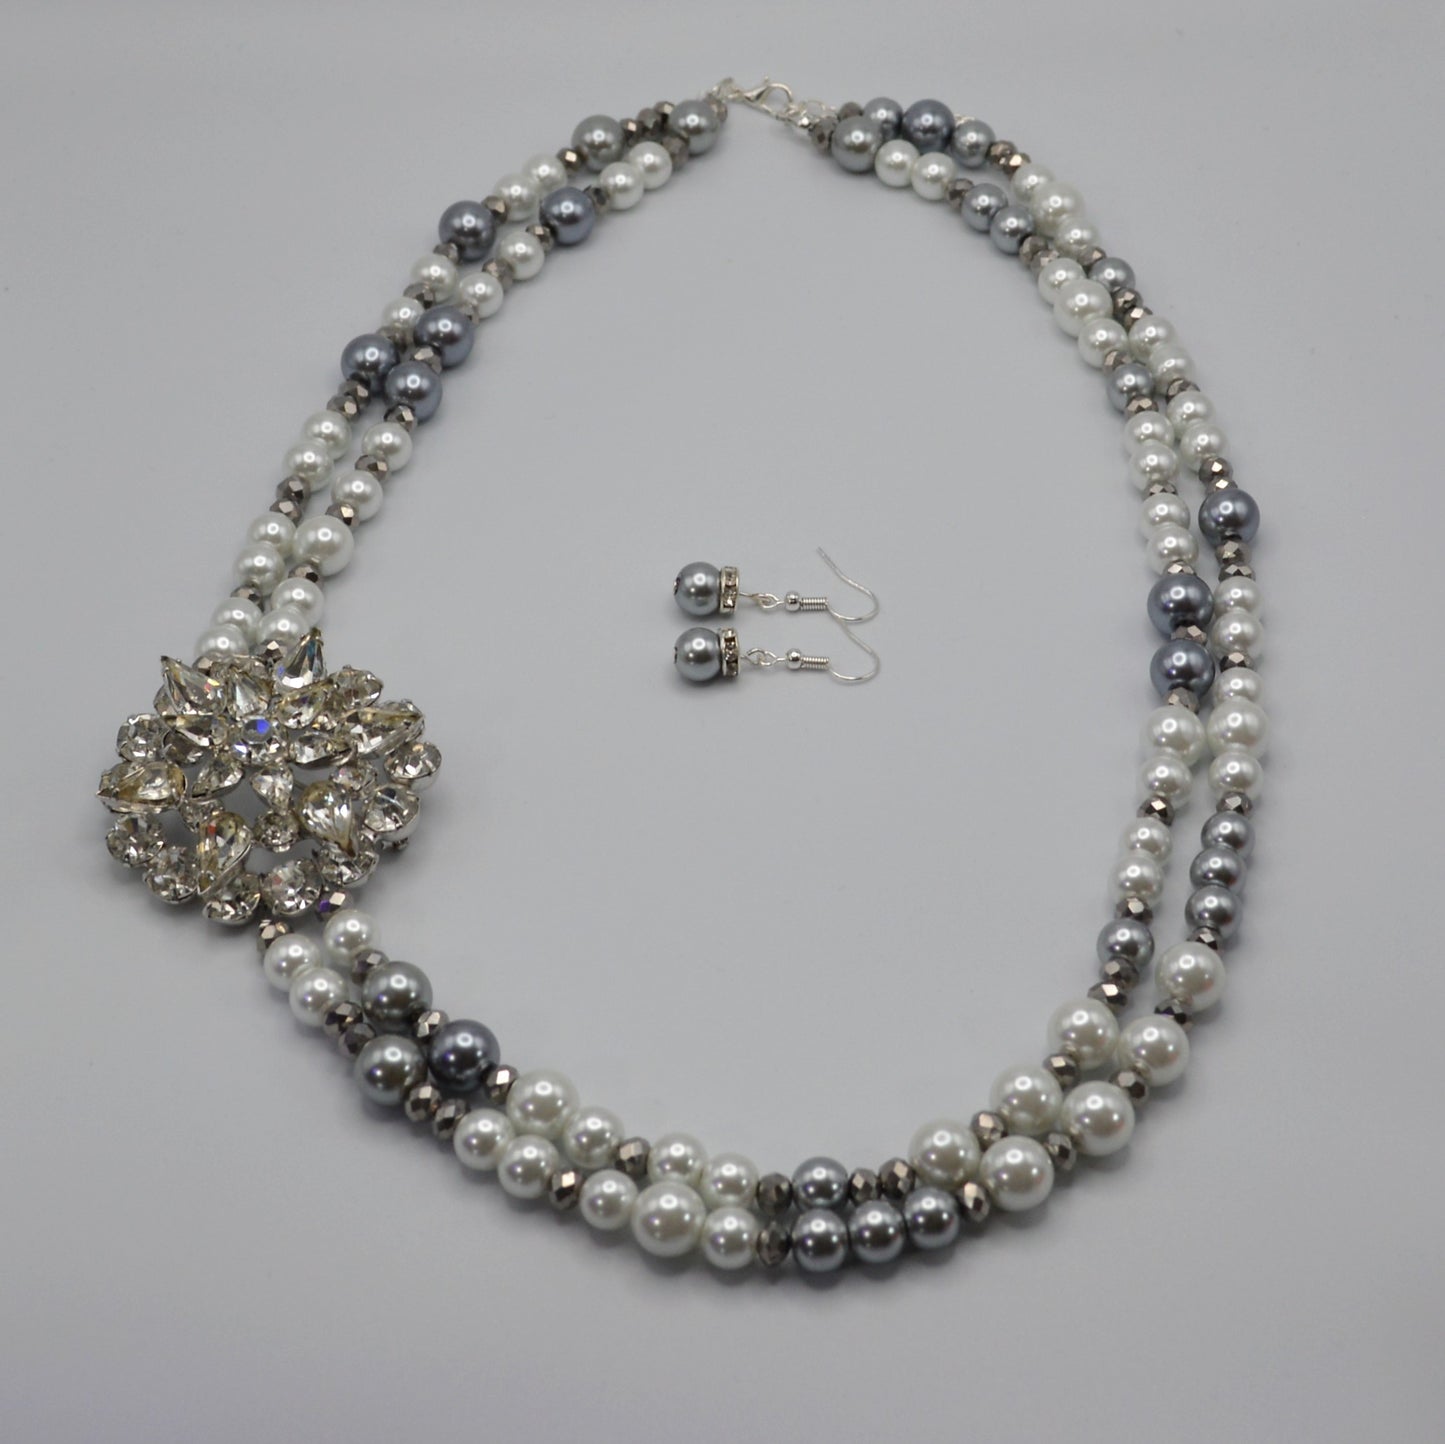 Vintage Crystal Brooch and Pearl Necklace (White and Silver)